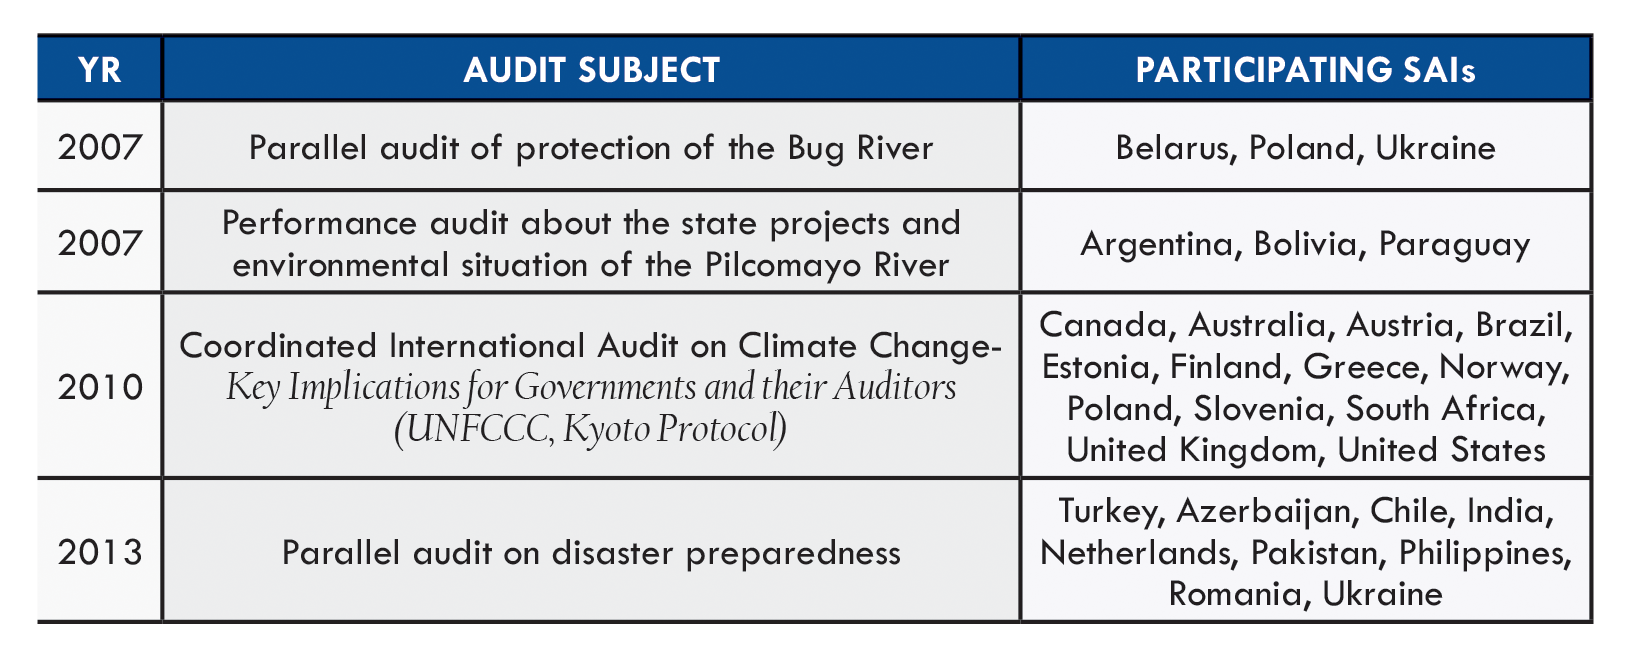 Table 2: Cooperative Audit Examples from INTOSAI WGEA